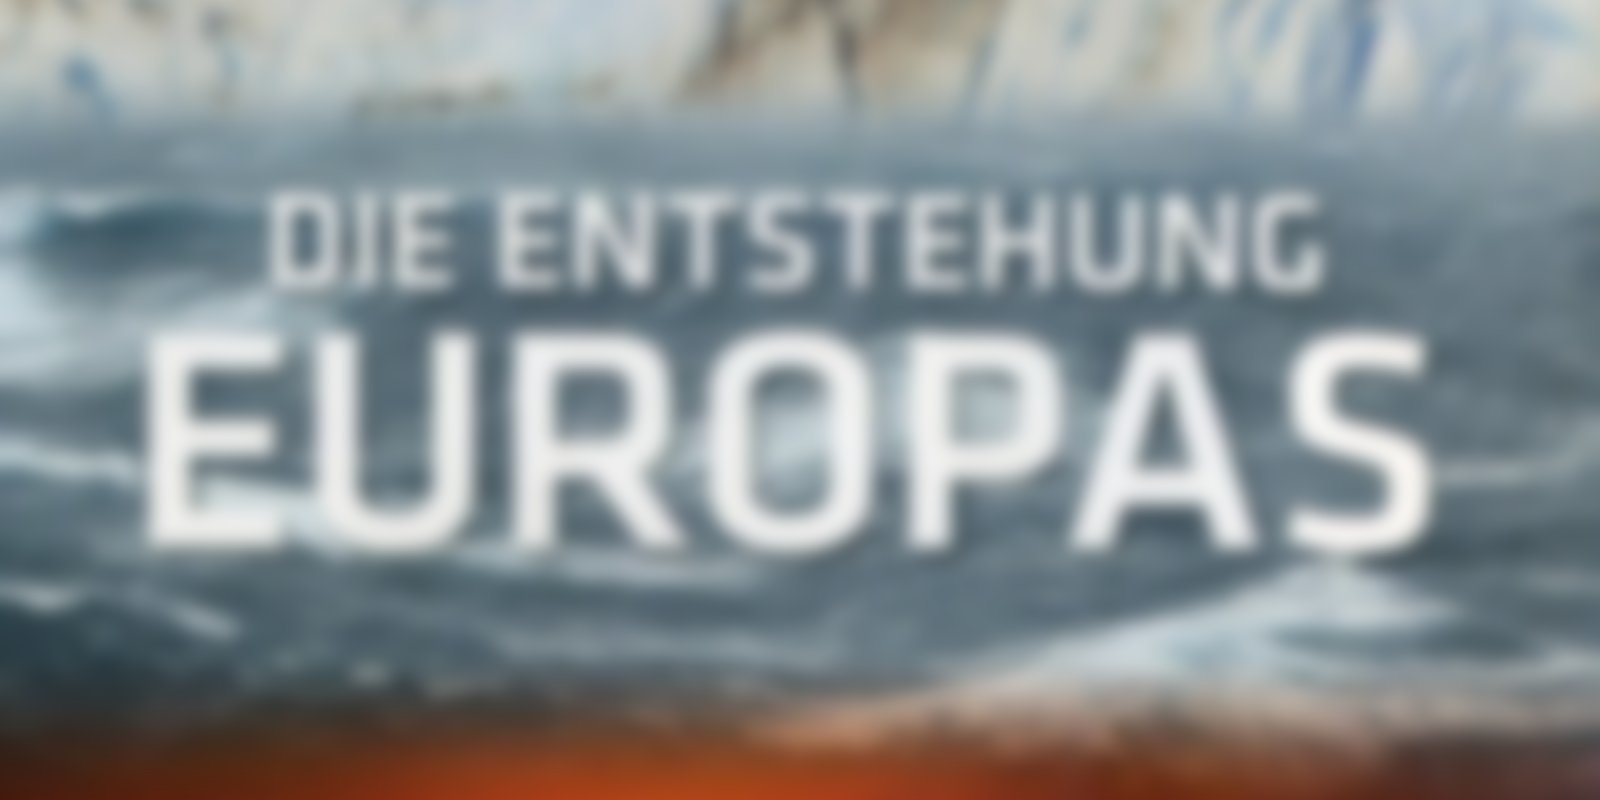 National Geographic - Die Entstehung Europas